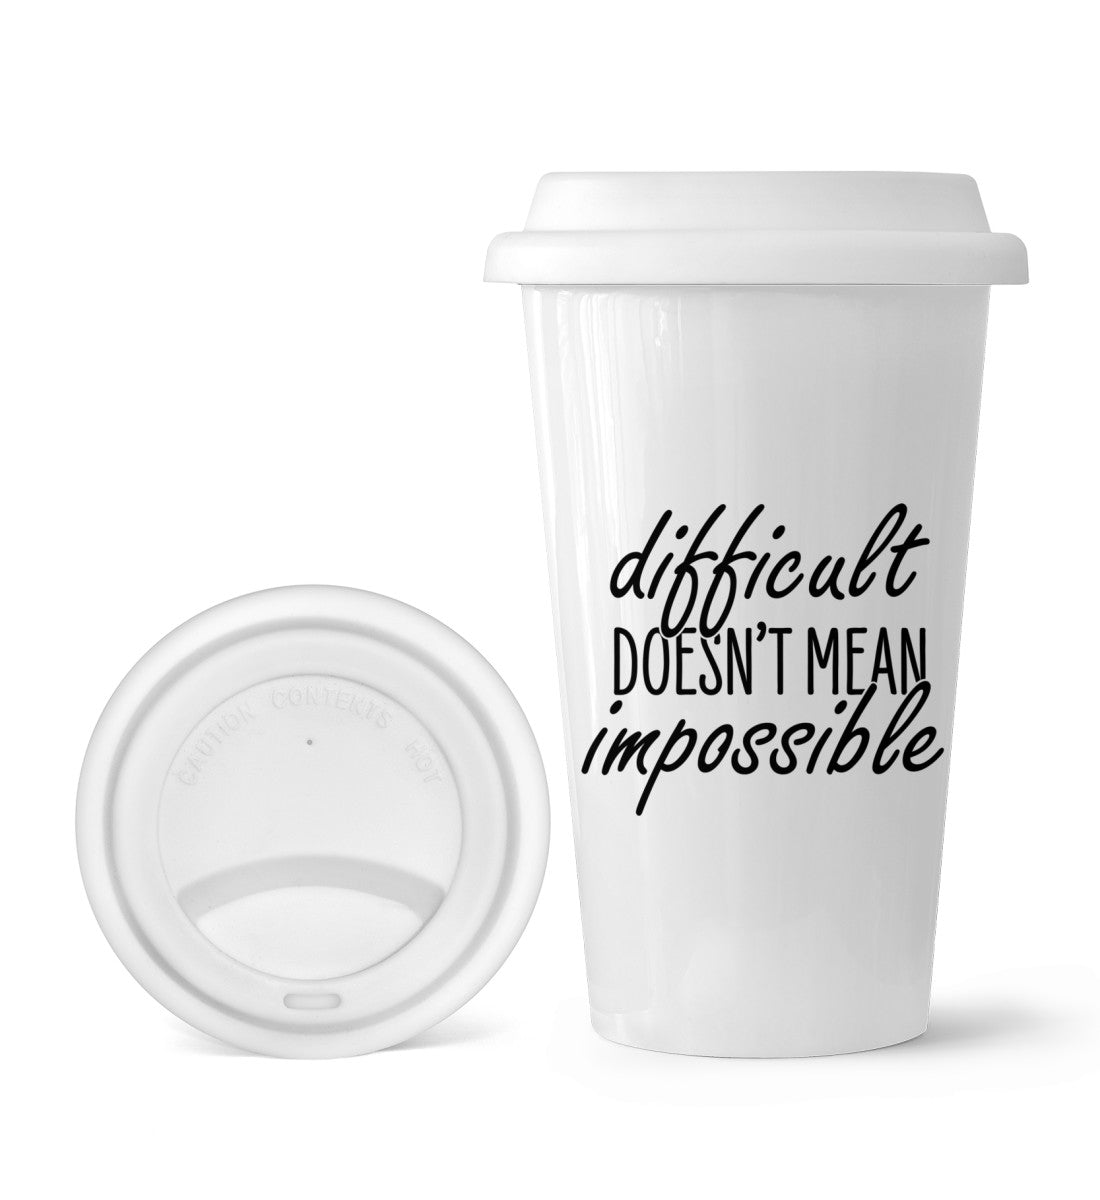 To-Go Becher aus Porzellan "difficult doesn't mean impossible"